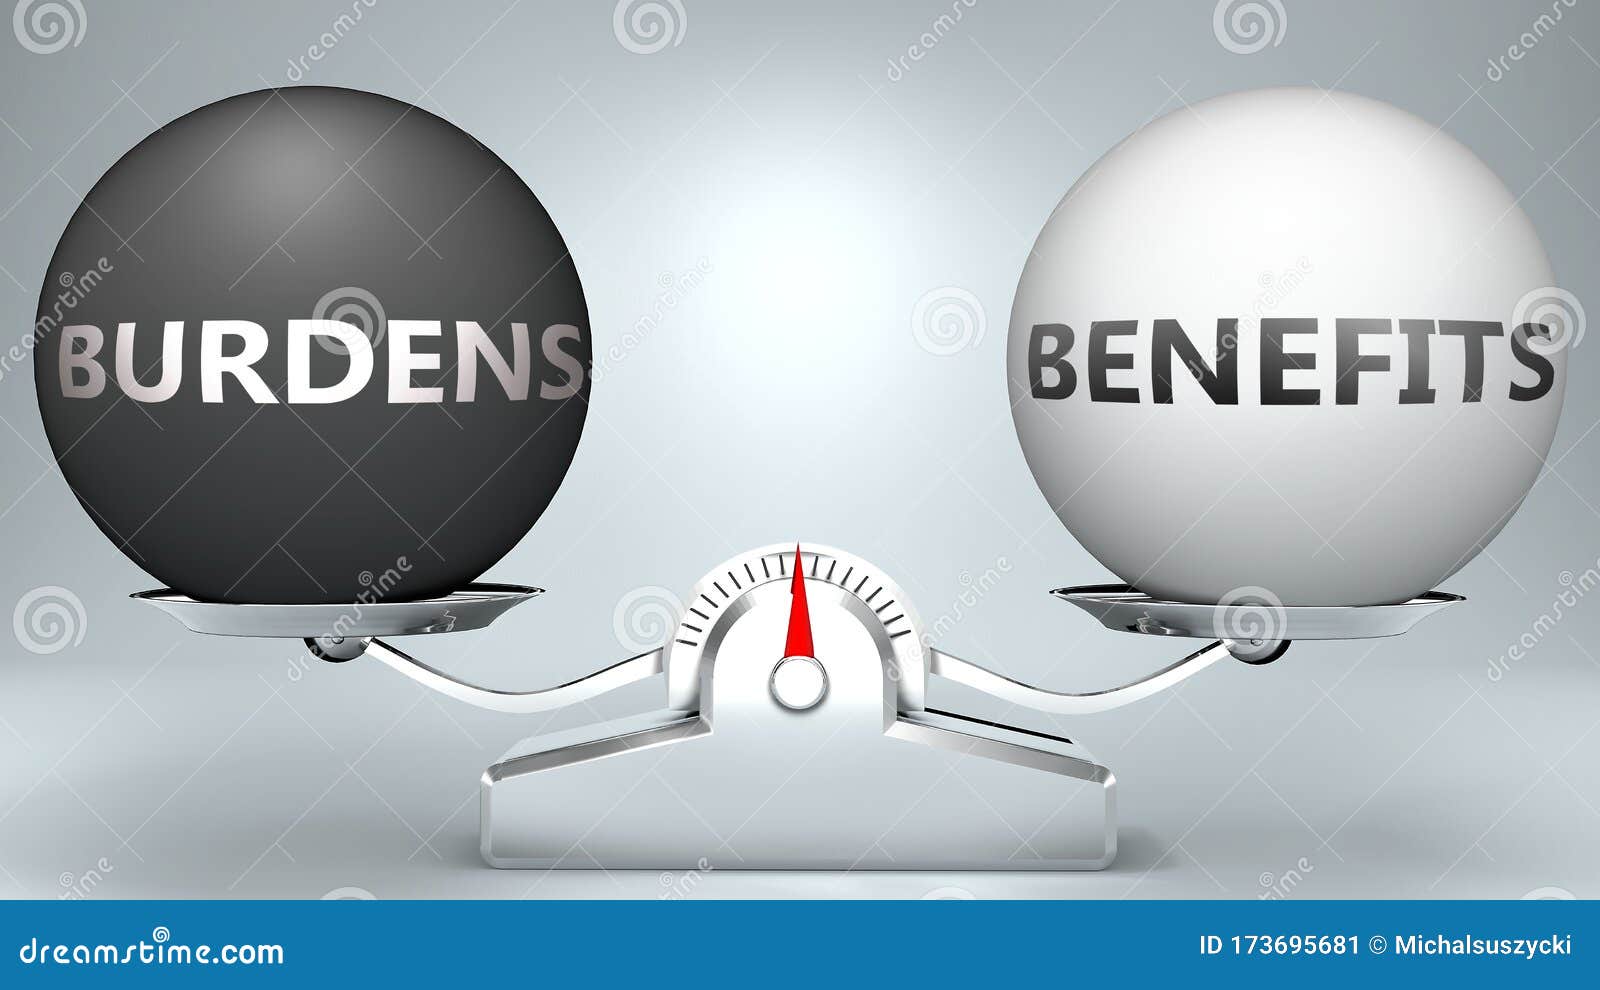 assignment of benefit and burden